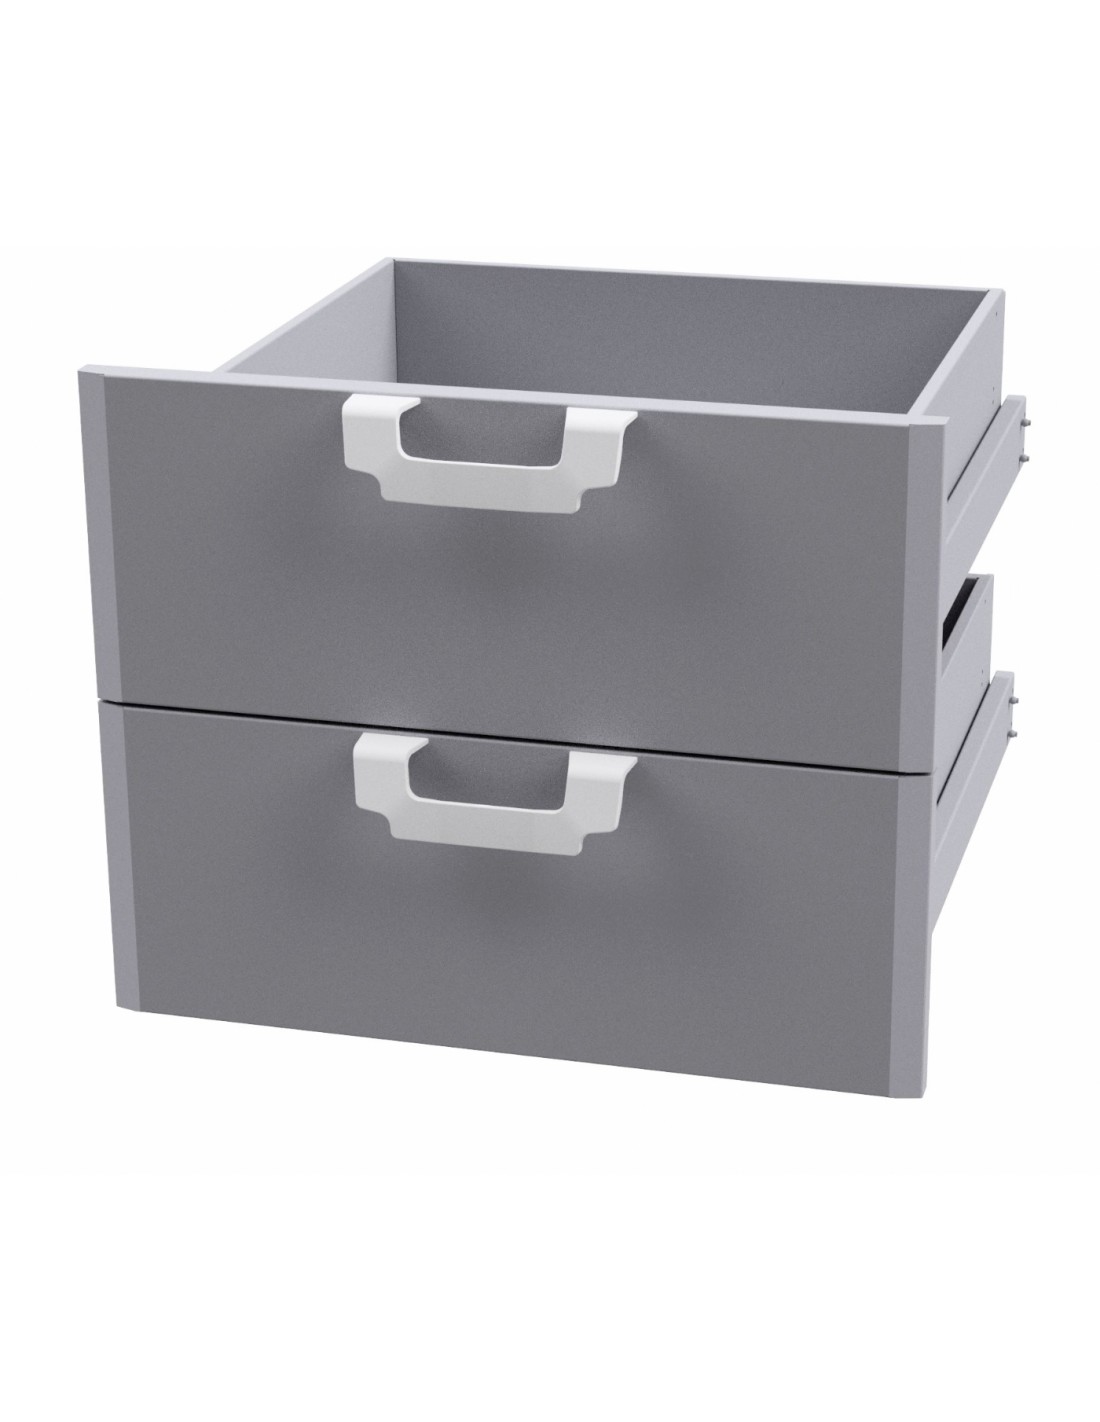 Chest of drawers 600 N. 2 drawers with 2 stainless steel basins, telescopic guides. Only on PL-Dimensions cm. 59.5x 59x 47.5